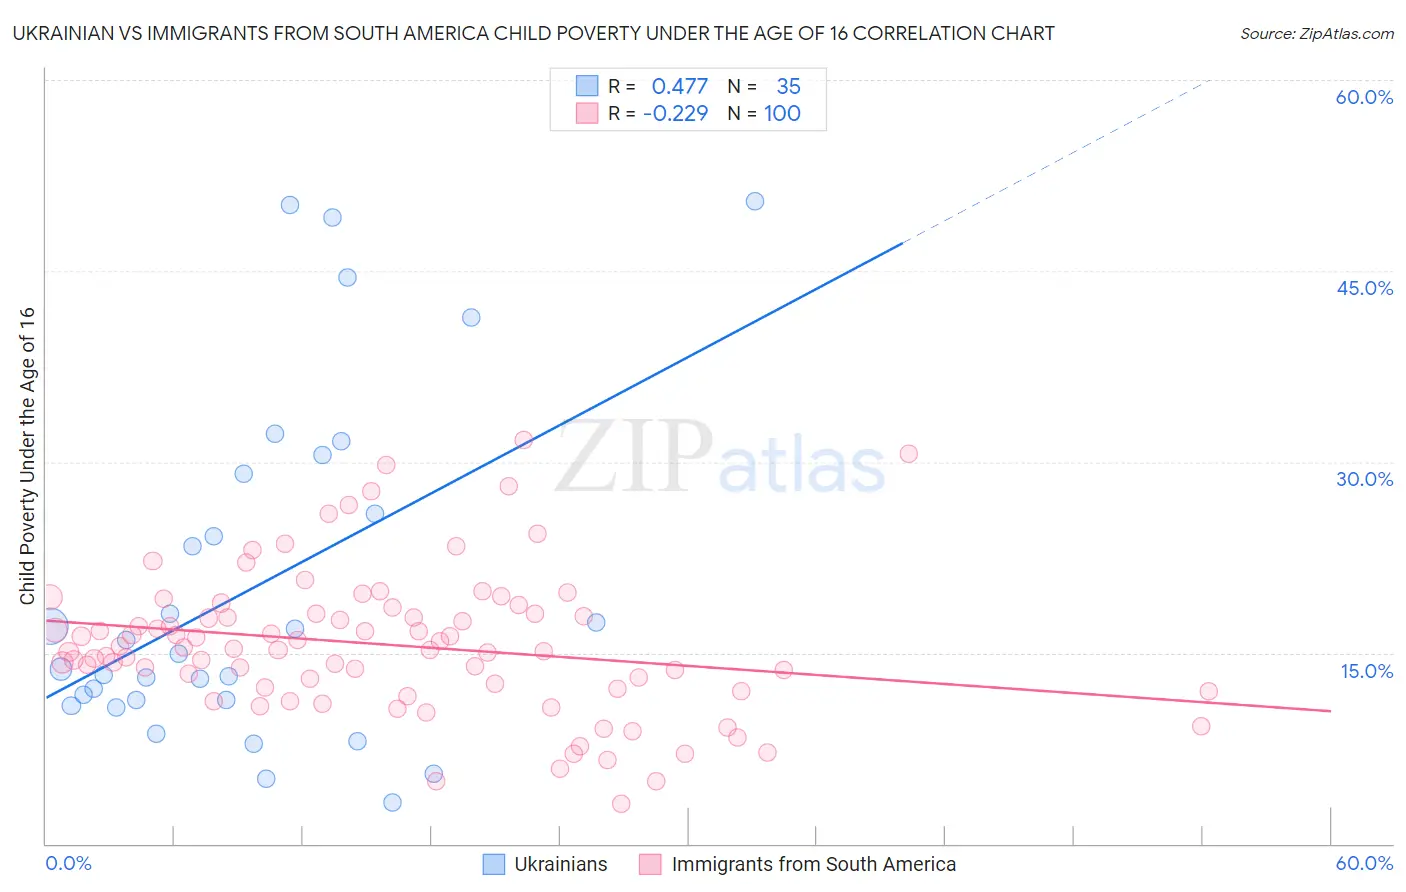 Ukrainian vs Immigrants from South America Child Poverty Under the Age of 16